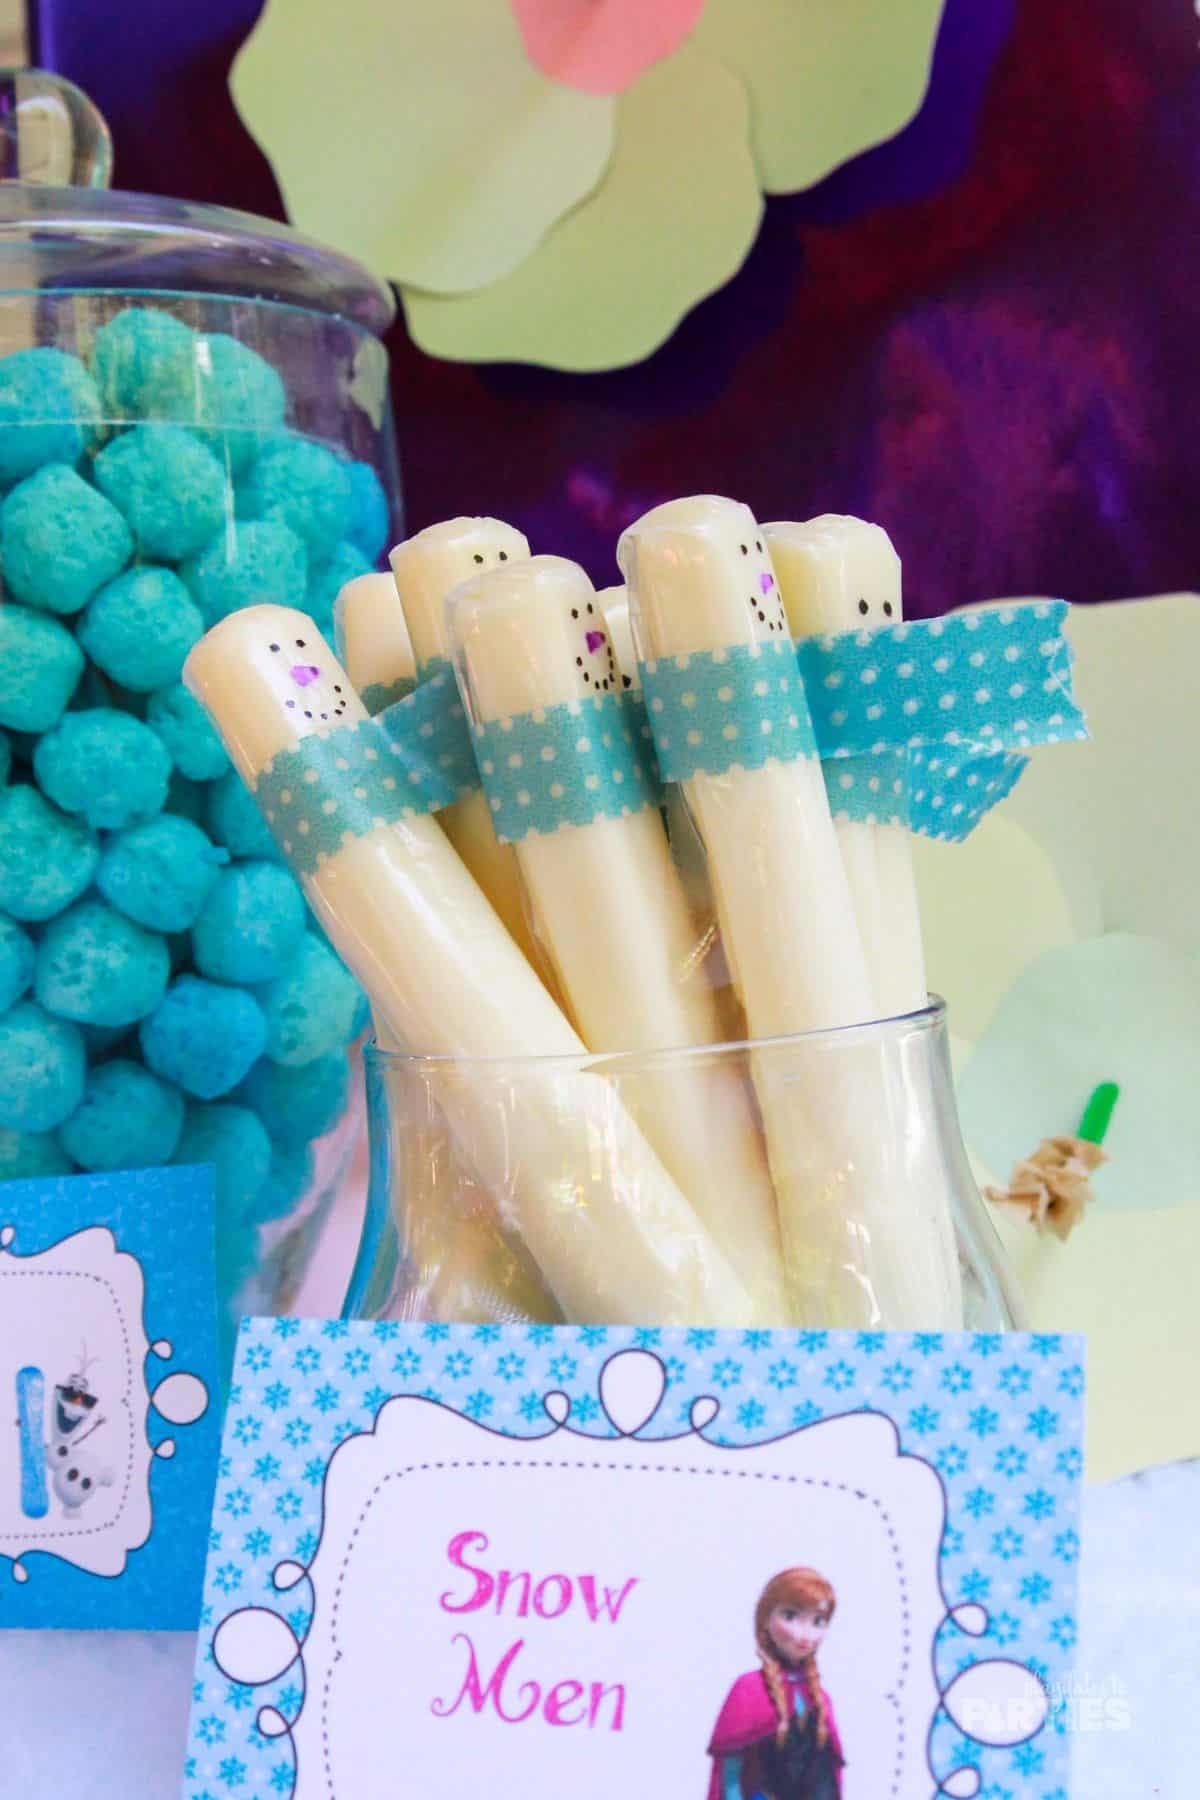 Cheese stick snowmen displayed at a Frozen themed party.